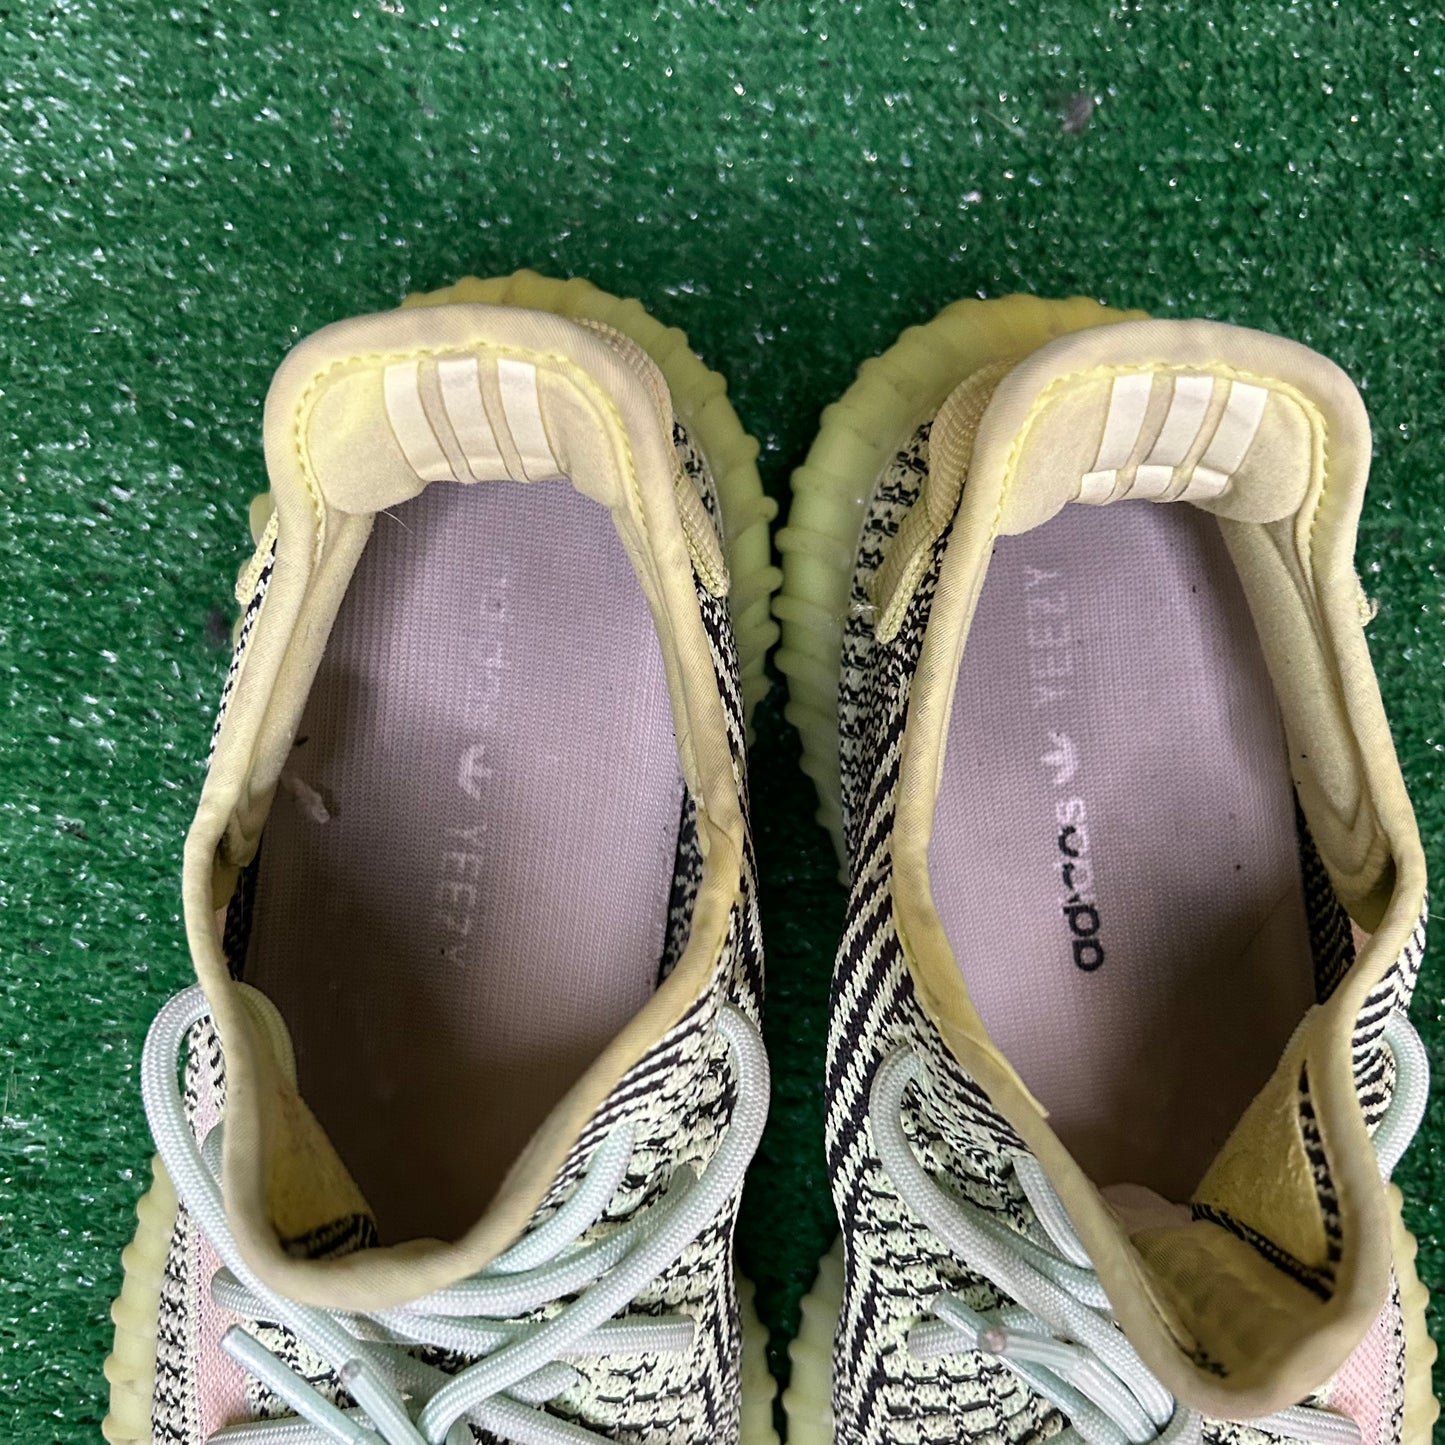 Yeezy Boost 350 V2 Yeezreel Non-Reflective (Pre-Owned)